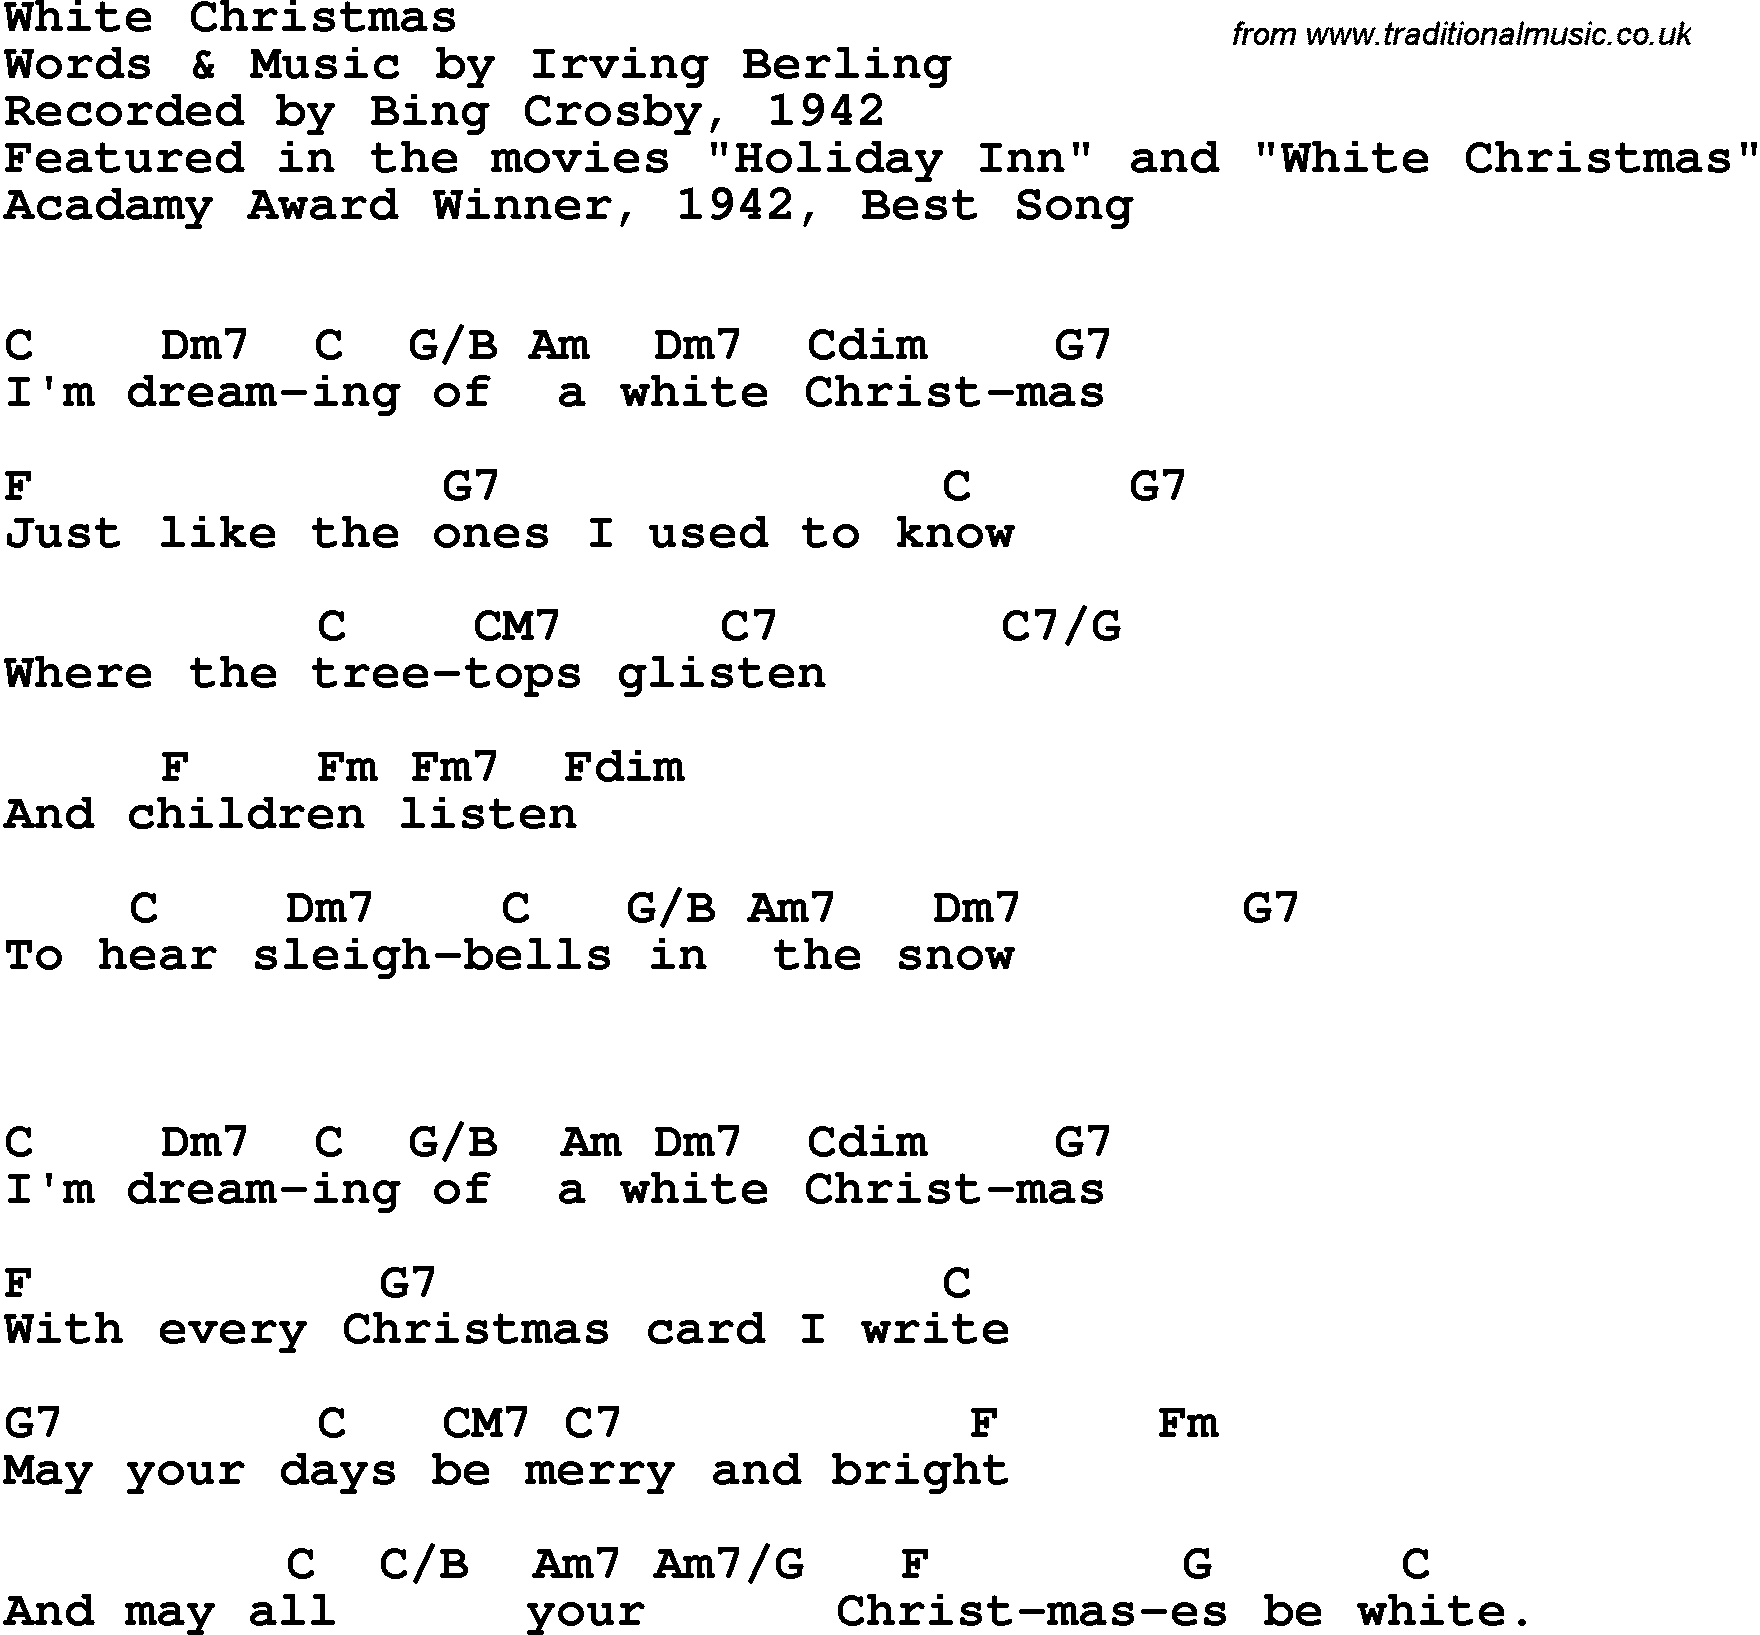 Song Lyrics with guitar chords for White Christmas - Bing Crosby, 1942